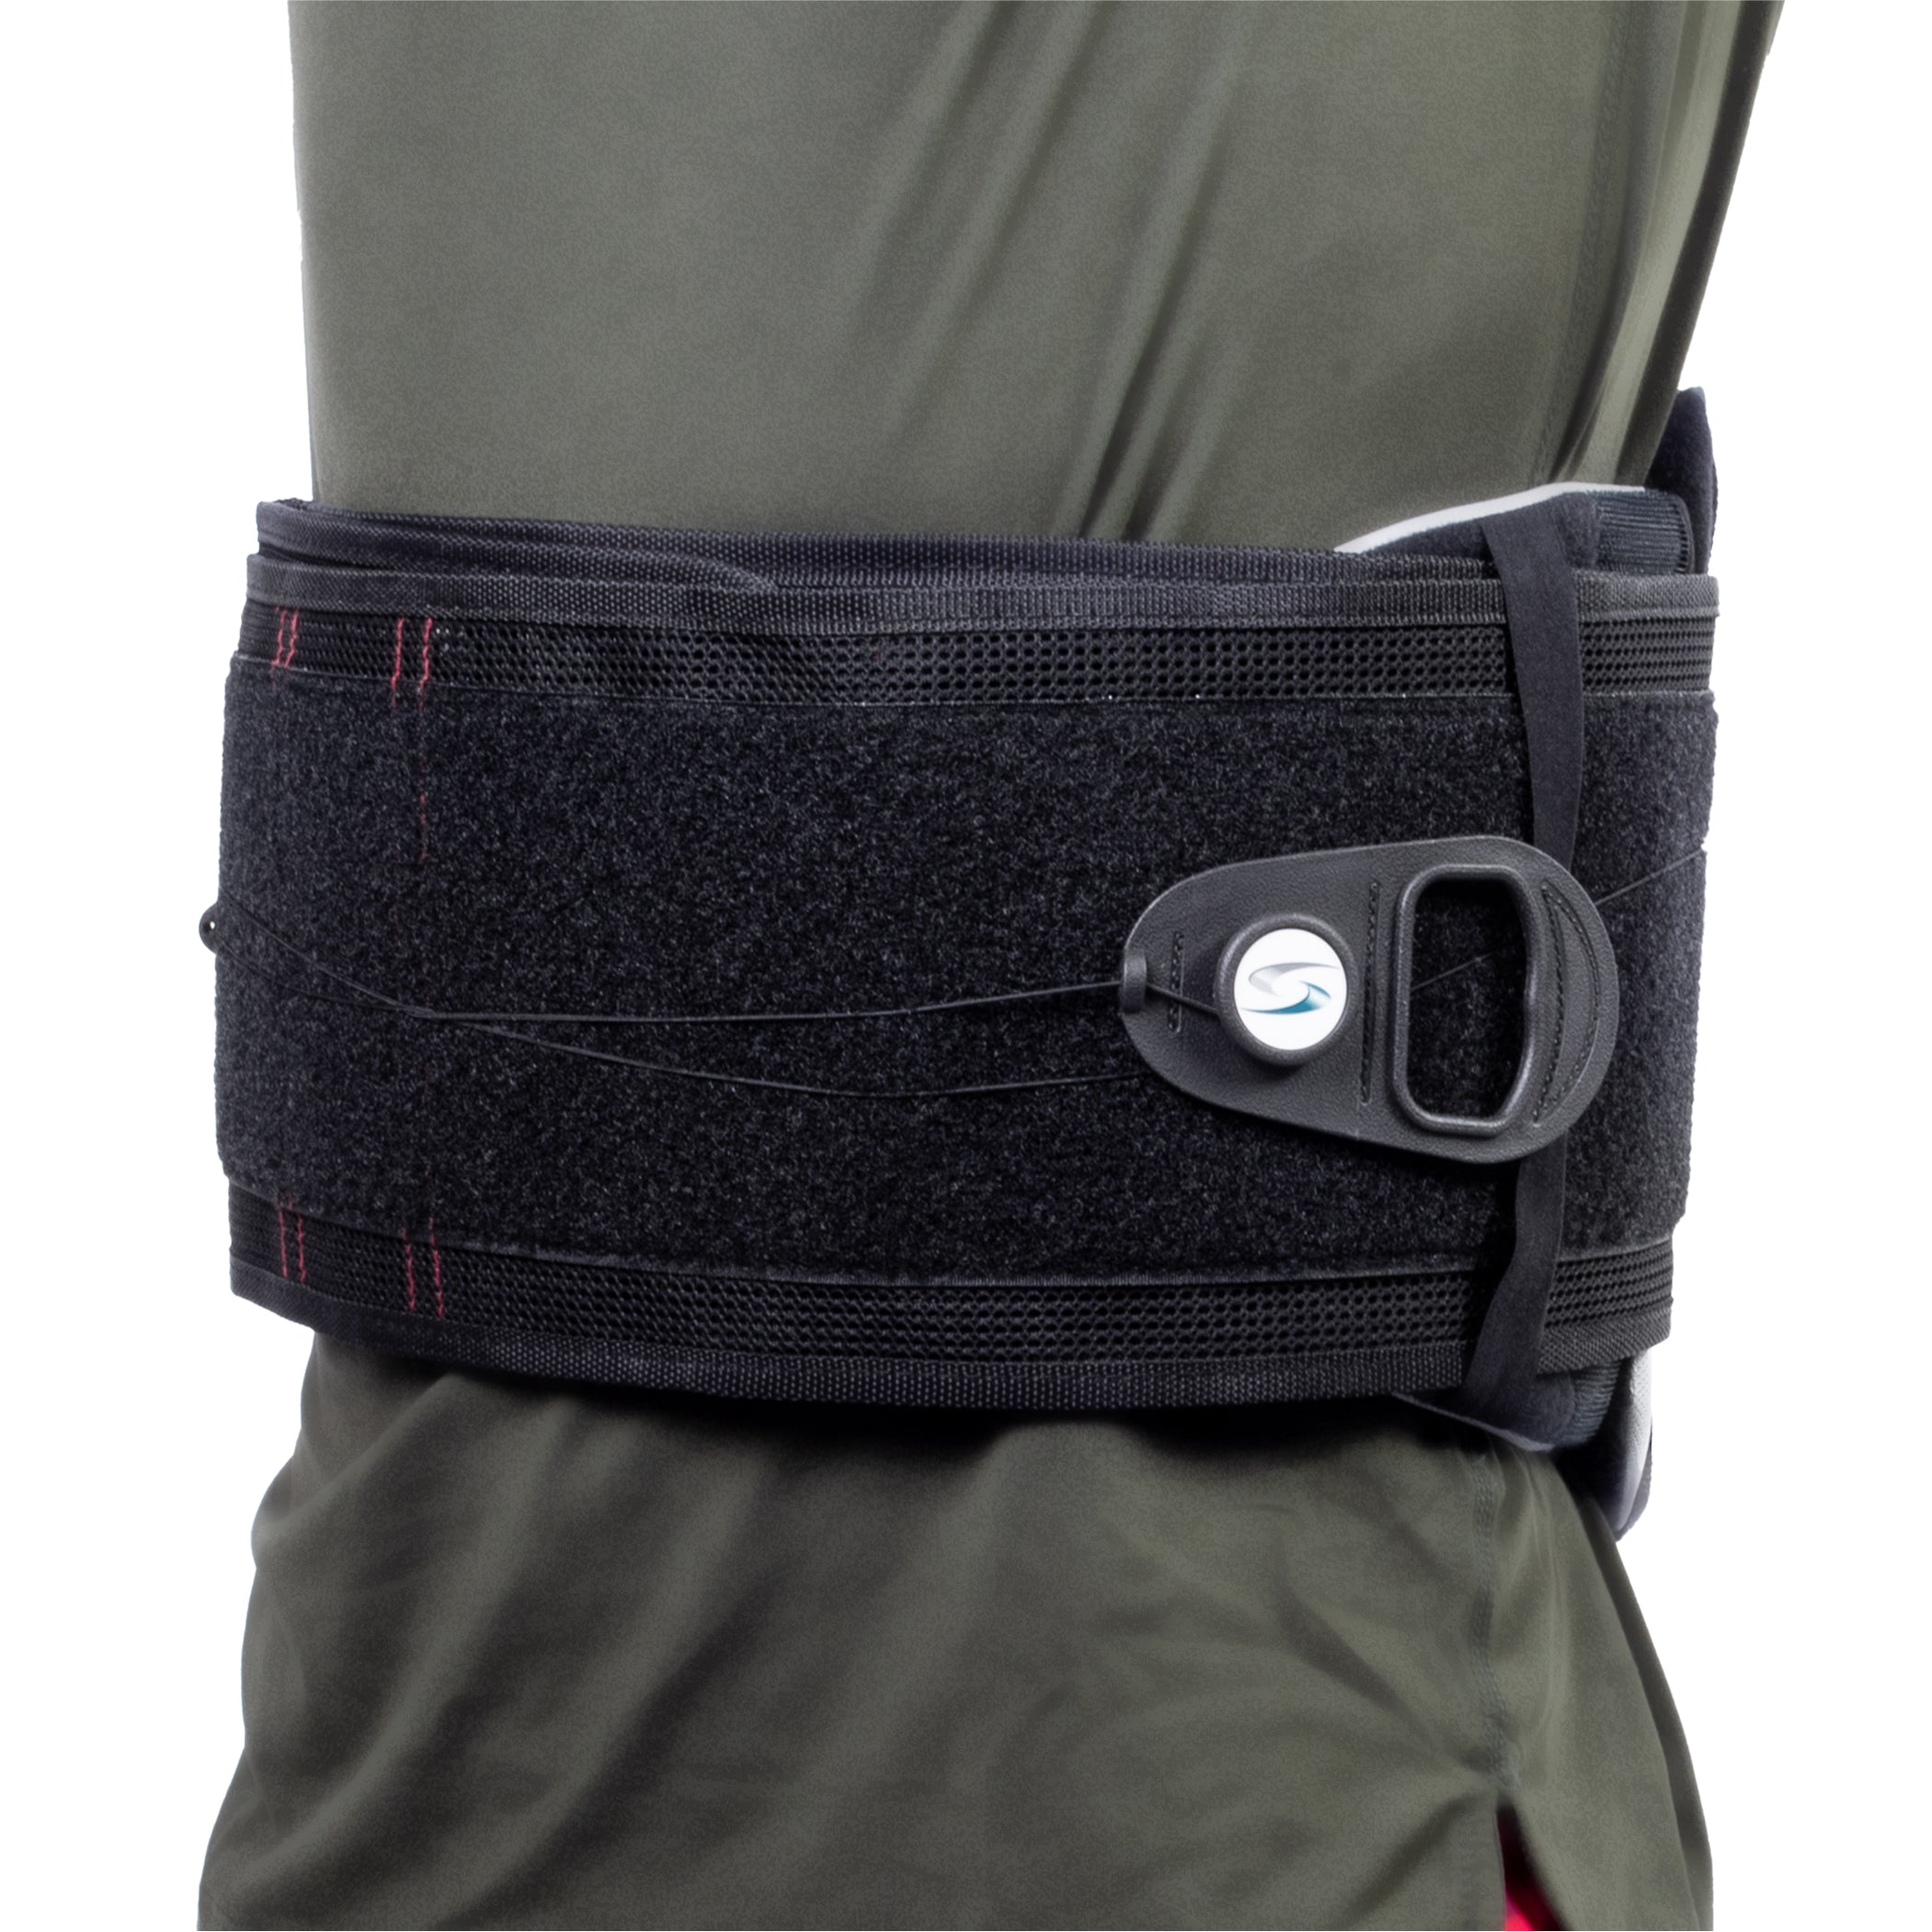 D-TONE Lumbar Sacral Lumbo Ls Belt For Lower Back Pain Relief